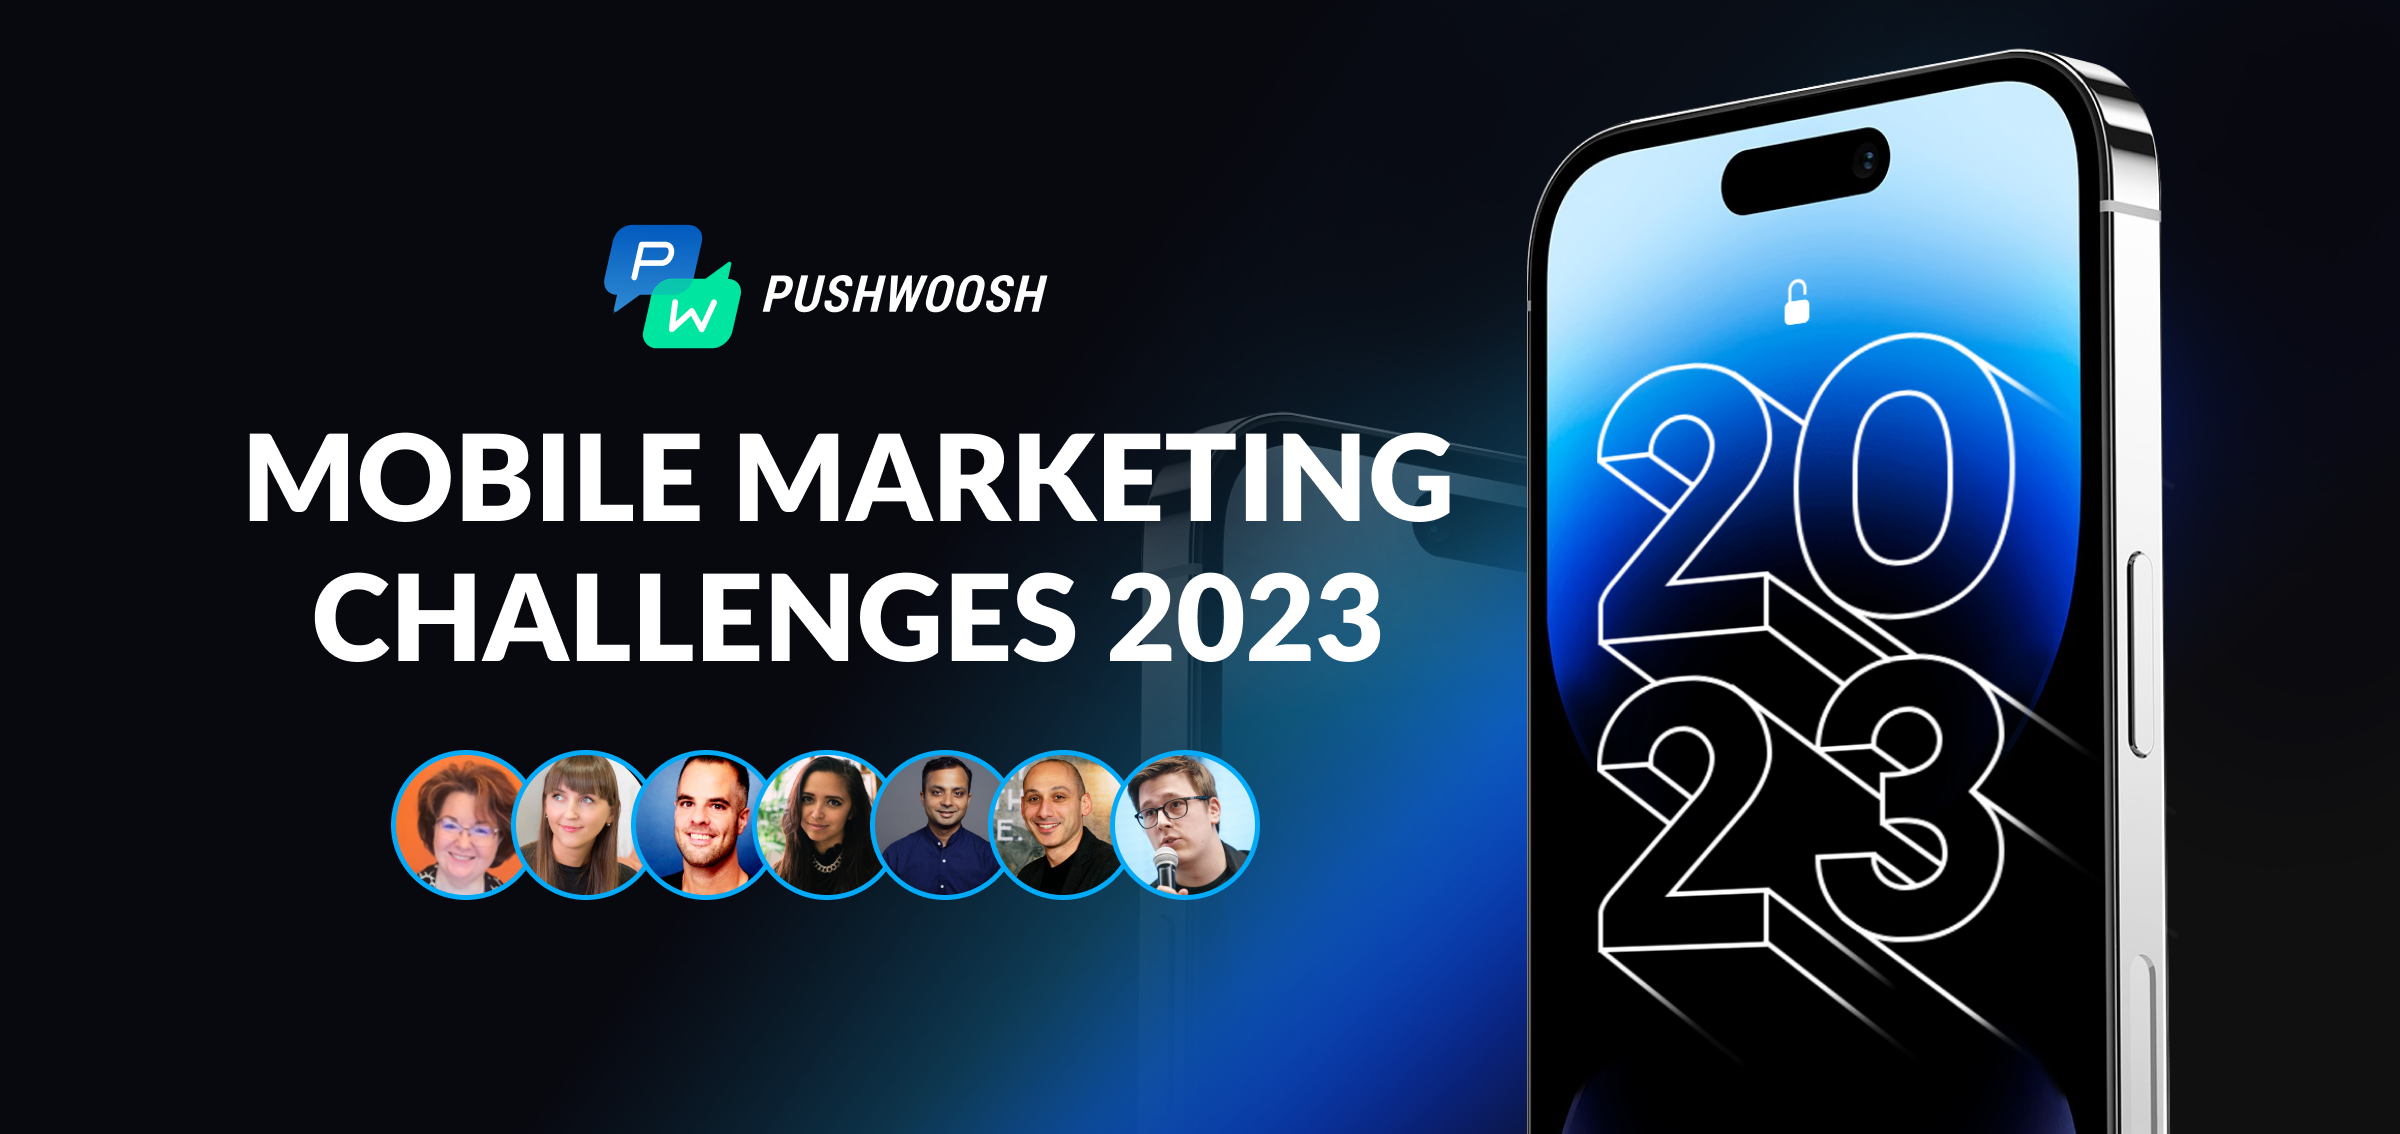 Mobile Marketing Challenges 2023: Industry Leaders Recommend